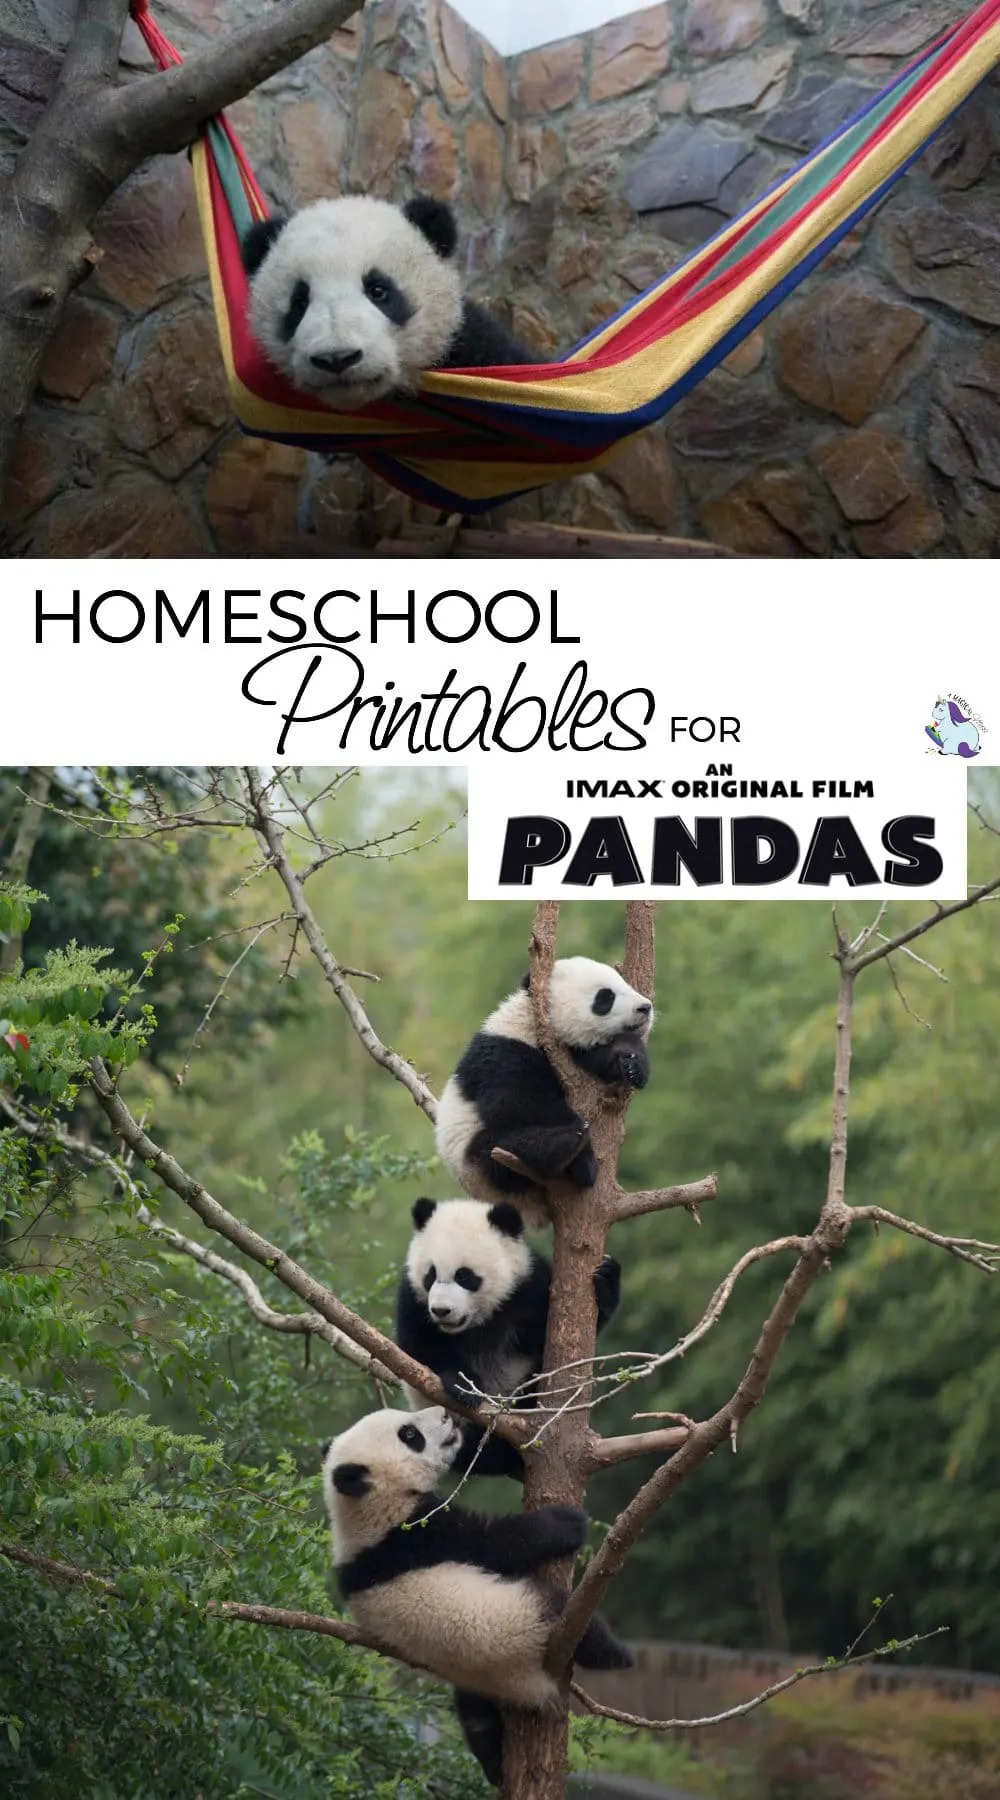 Homeschool printables to go with the new PANDAS movie